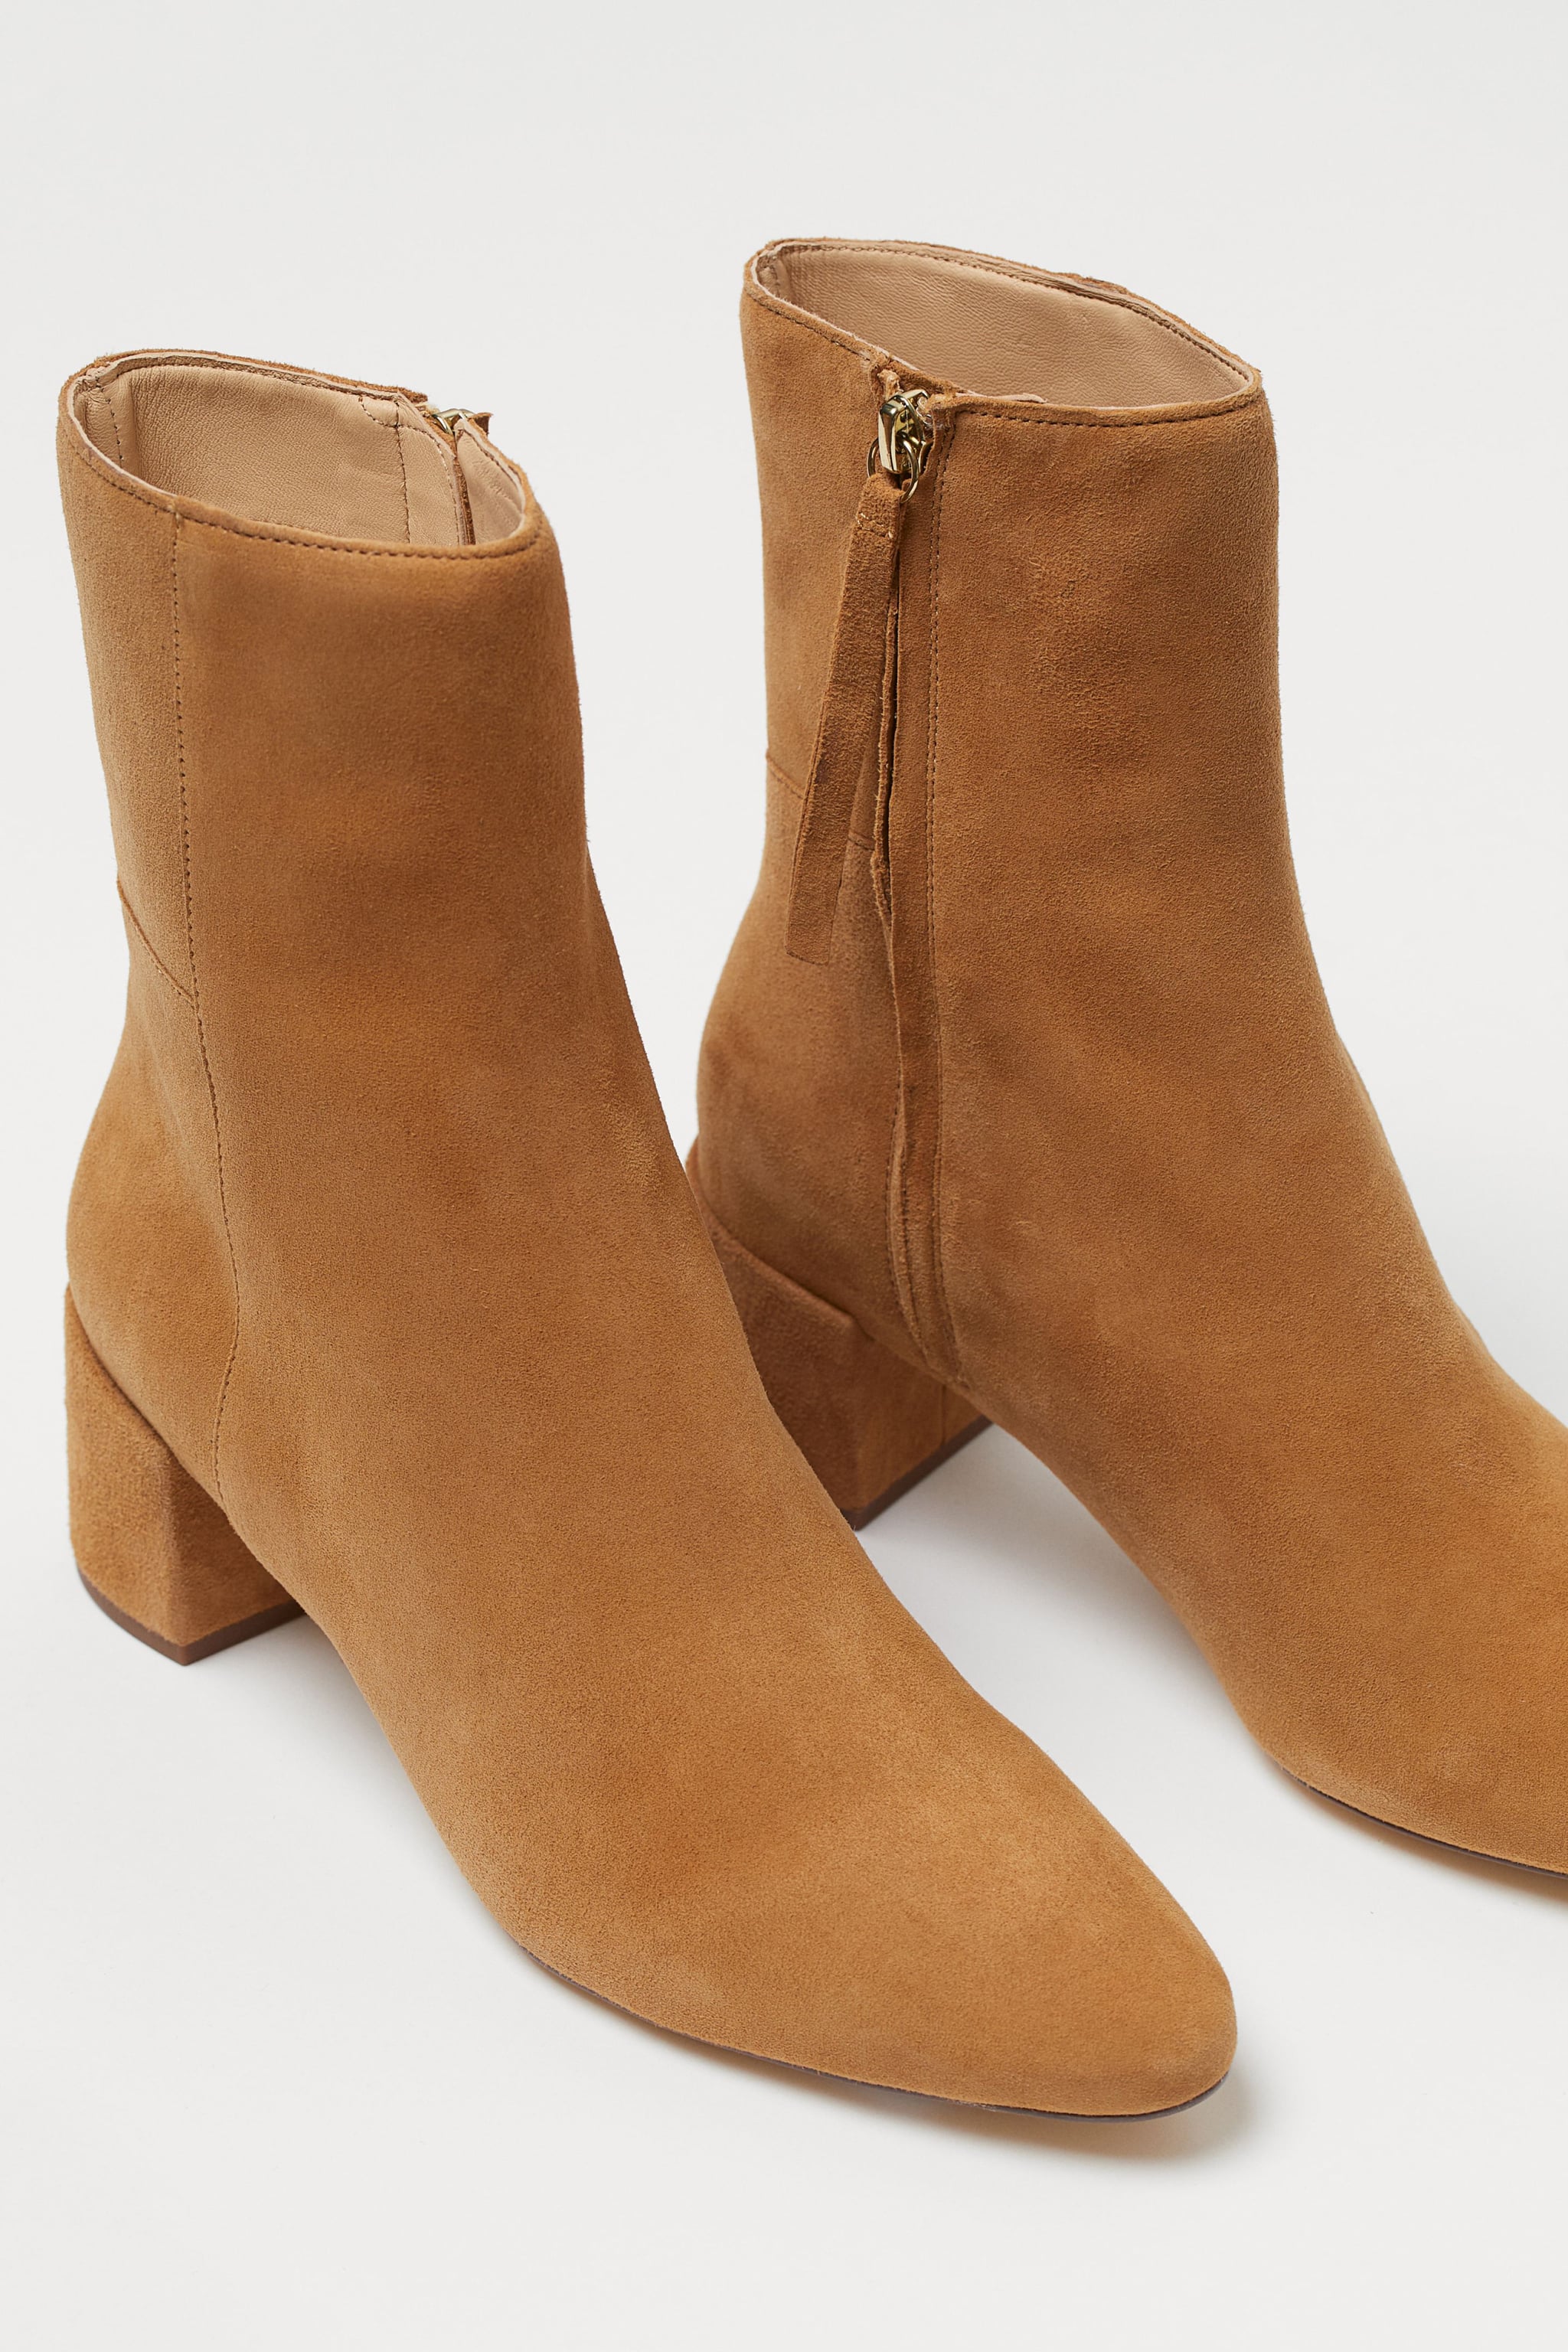 H\u0026M Suede Ankle Boots | 19 Spring Shoe 